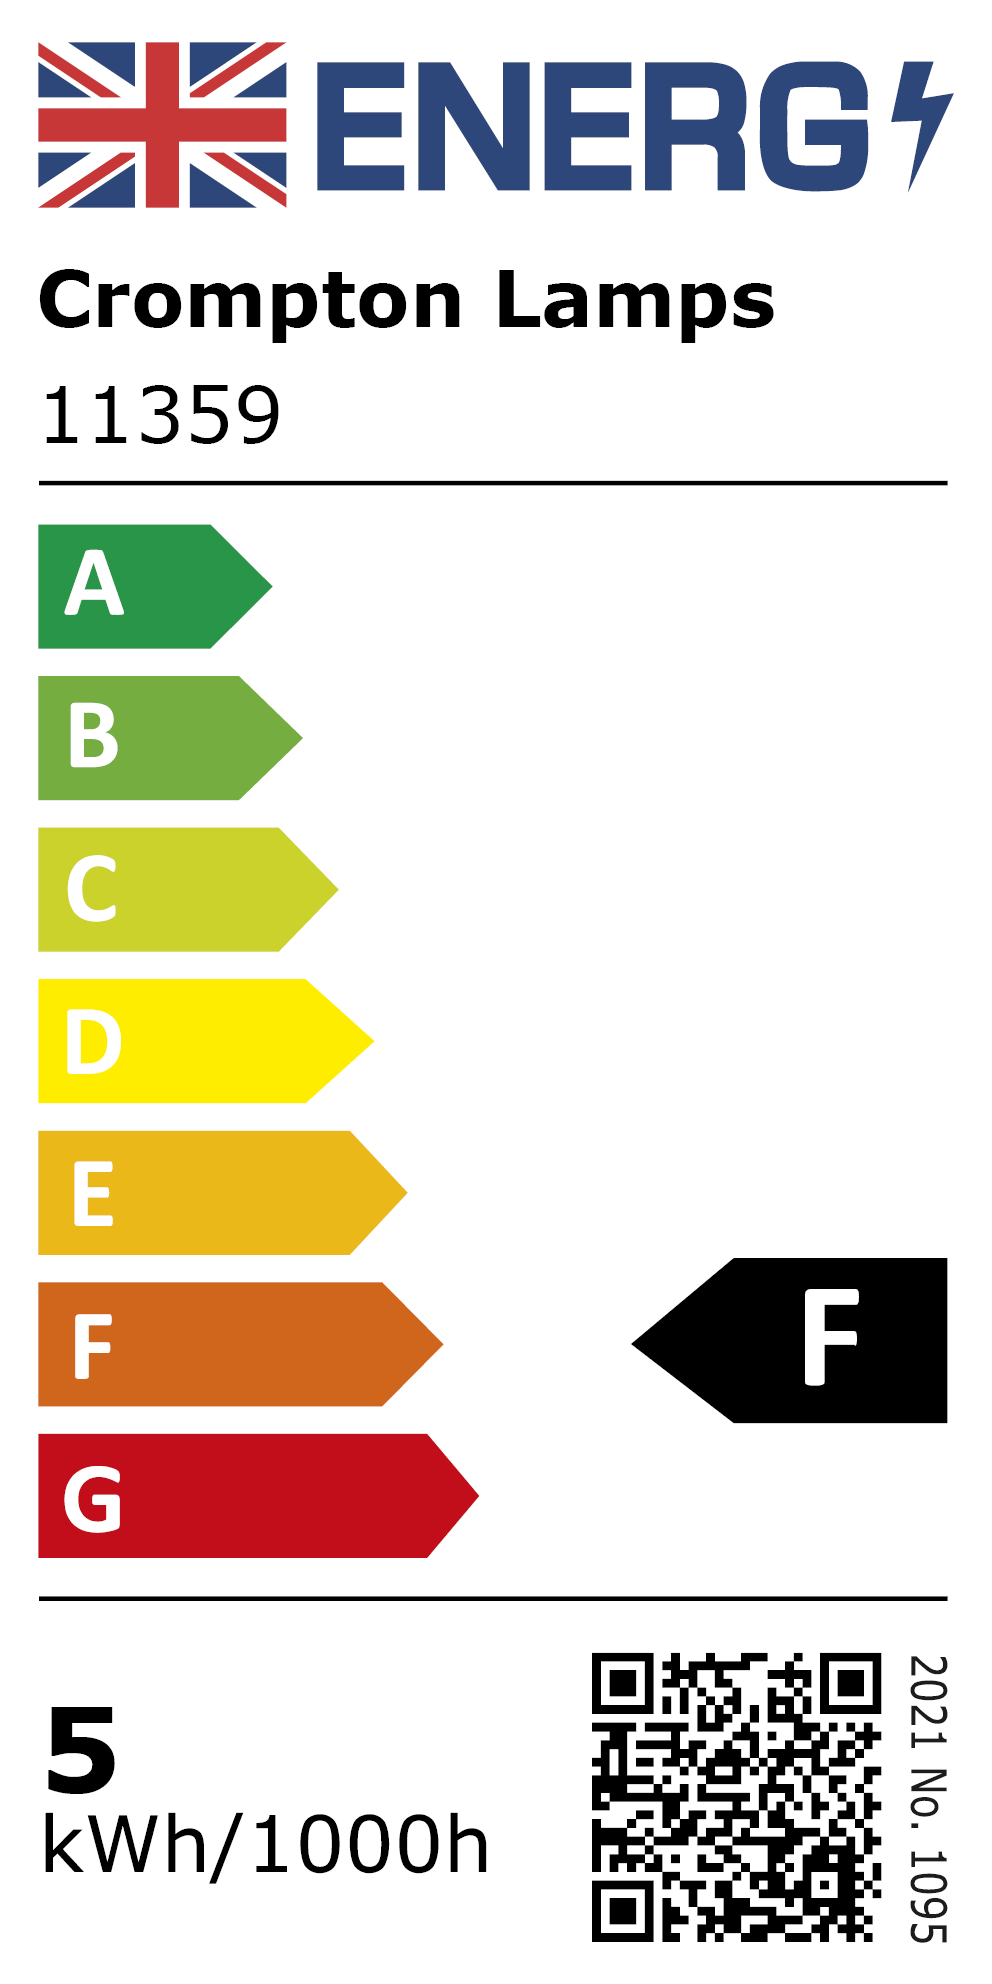 New 2021 Energy Rating Label: MPN 11359